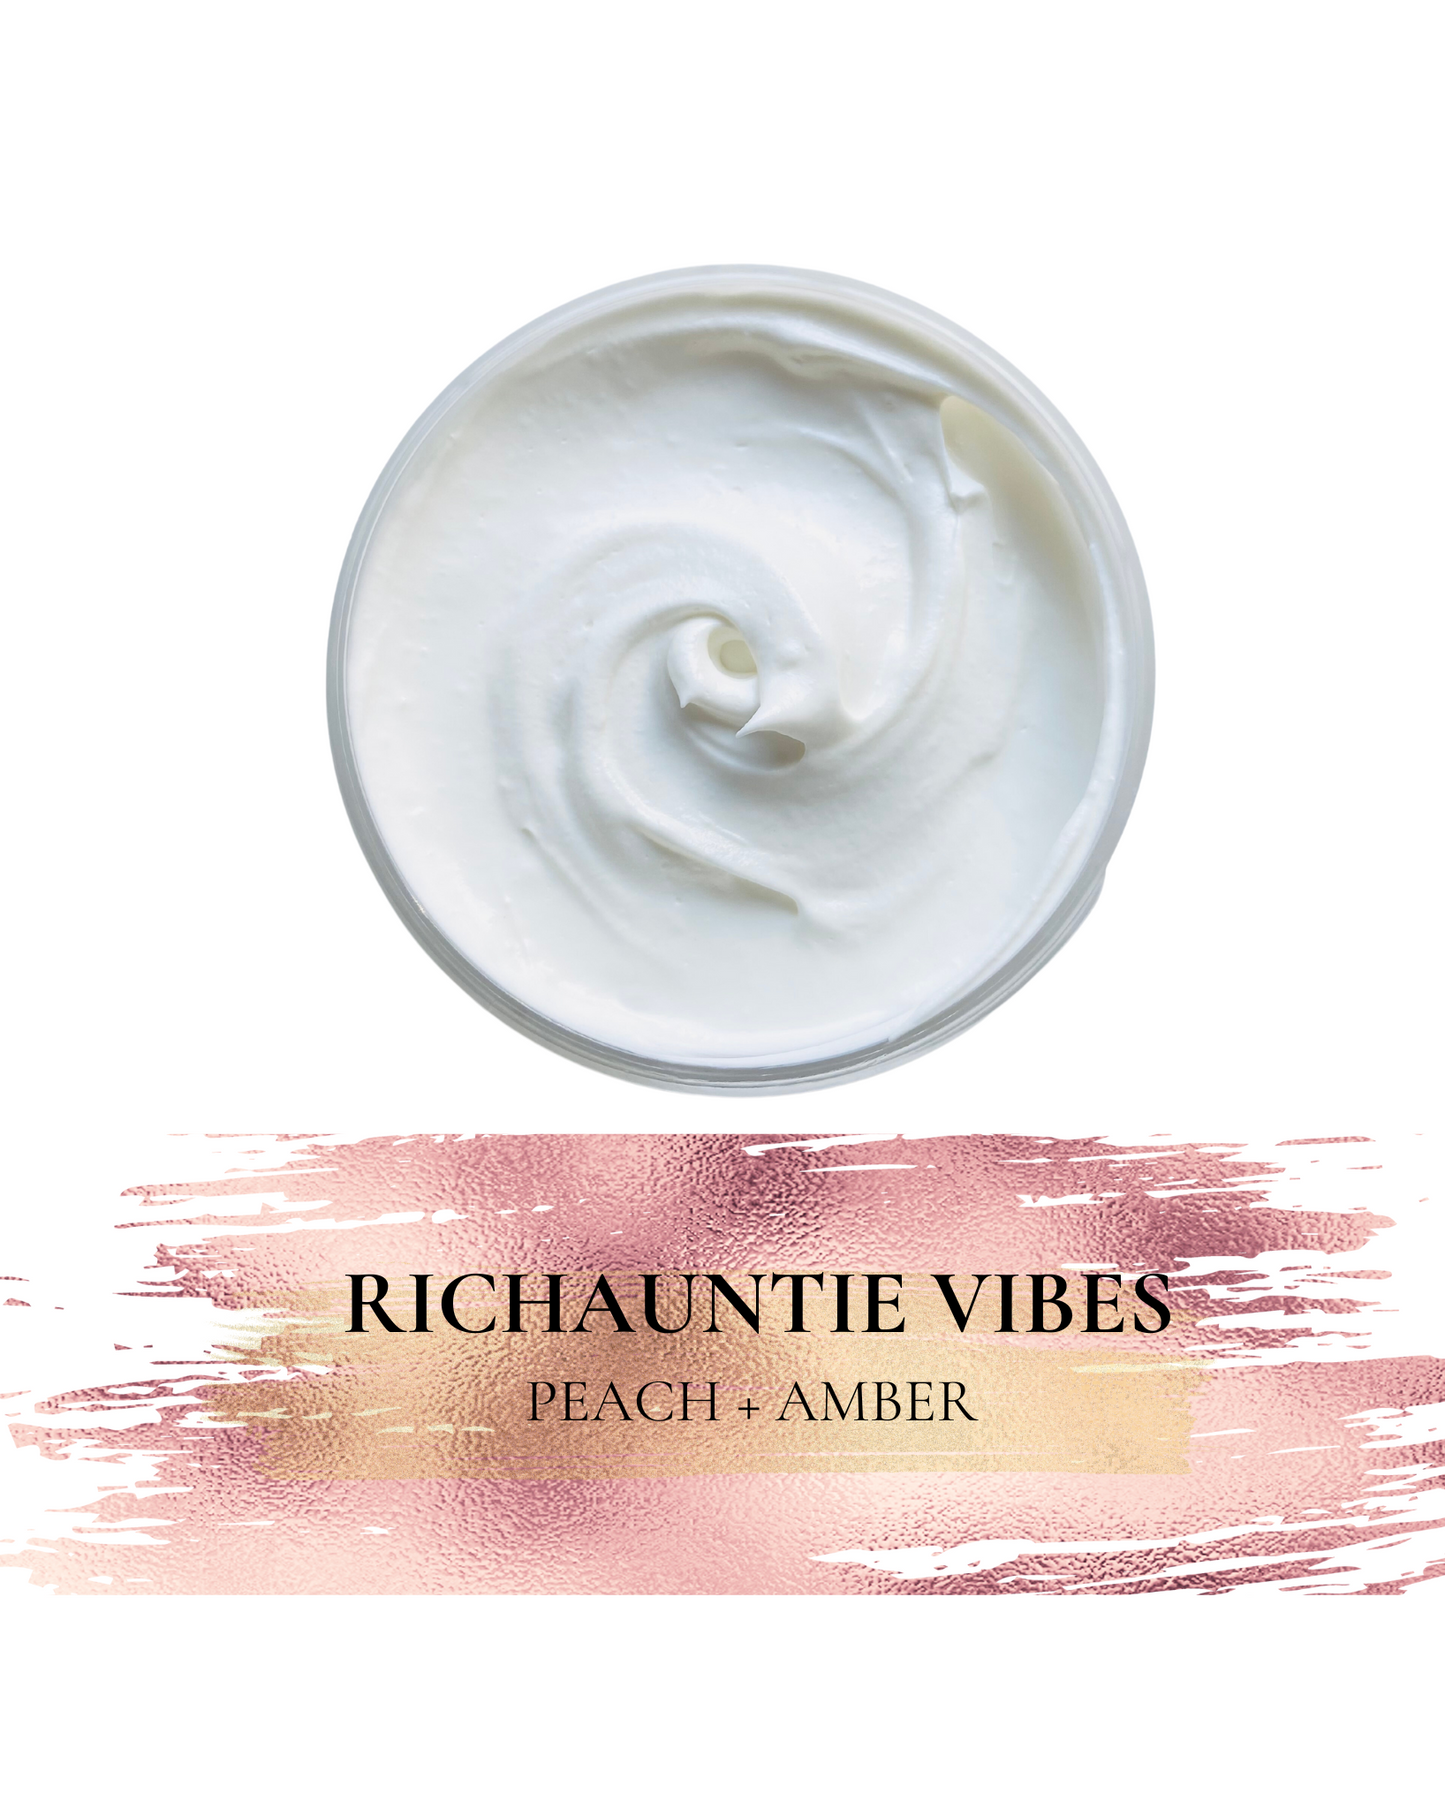 RICH AUNTIE VIBES WHIPPED BODY BUTTER